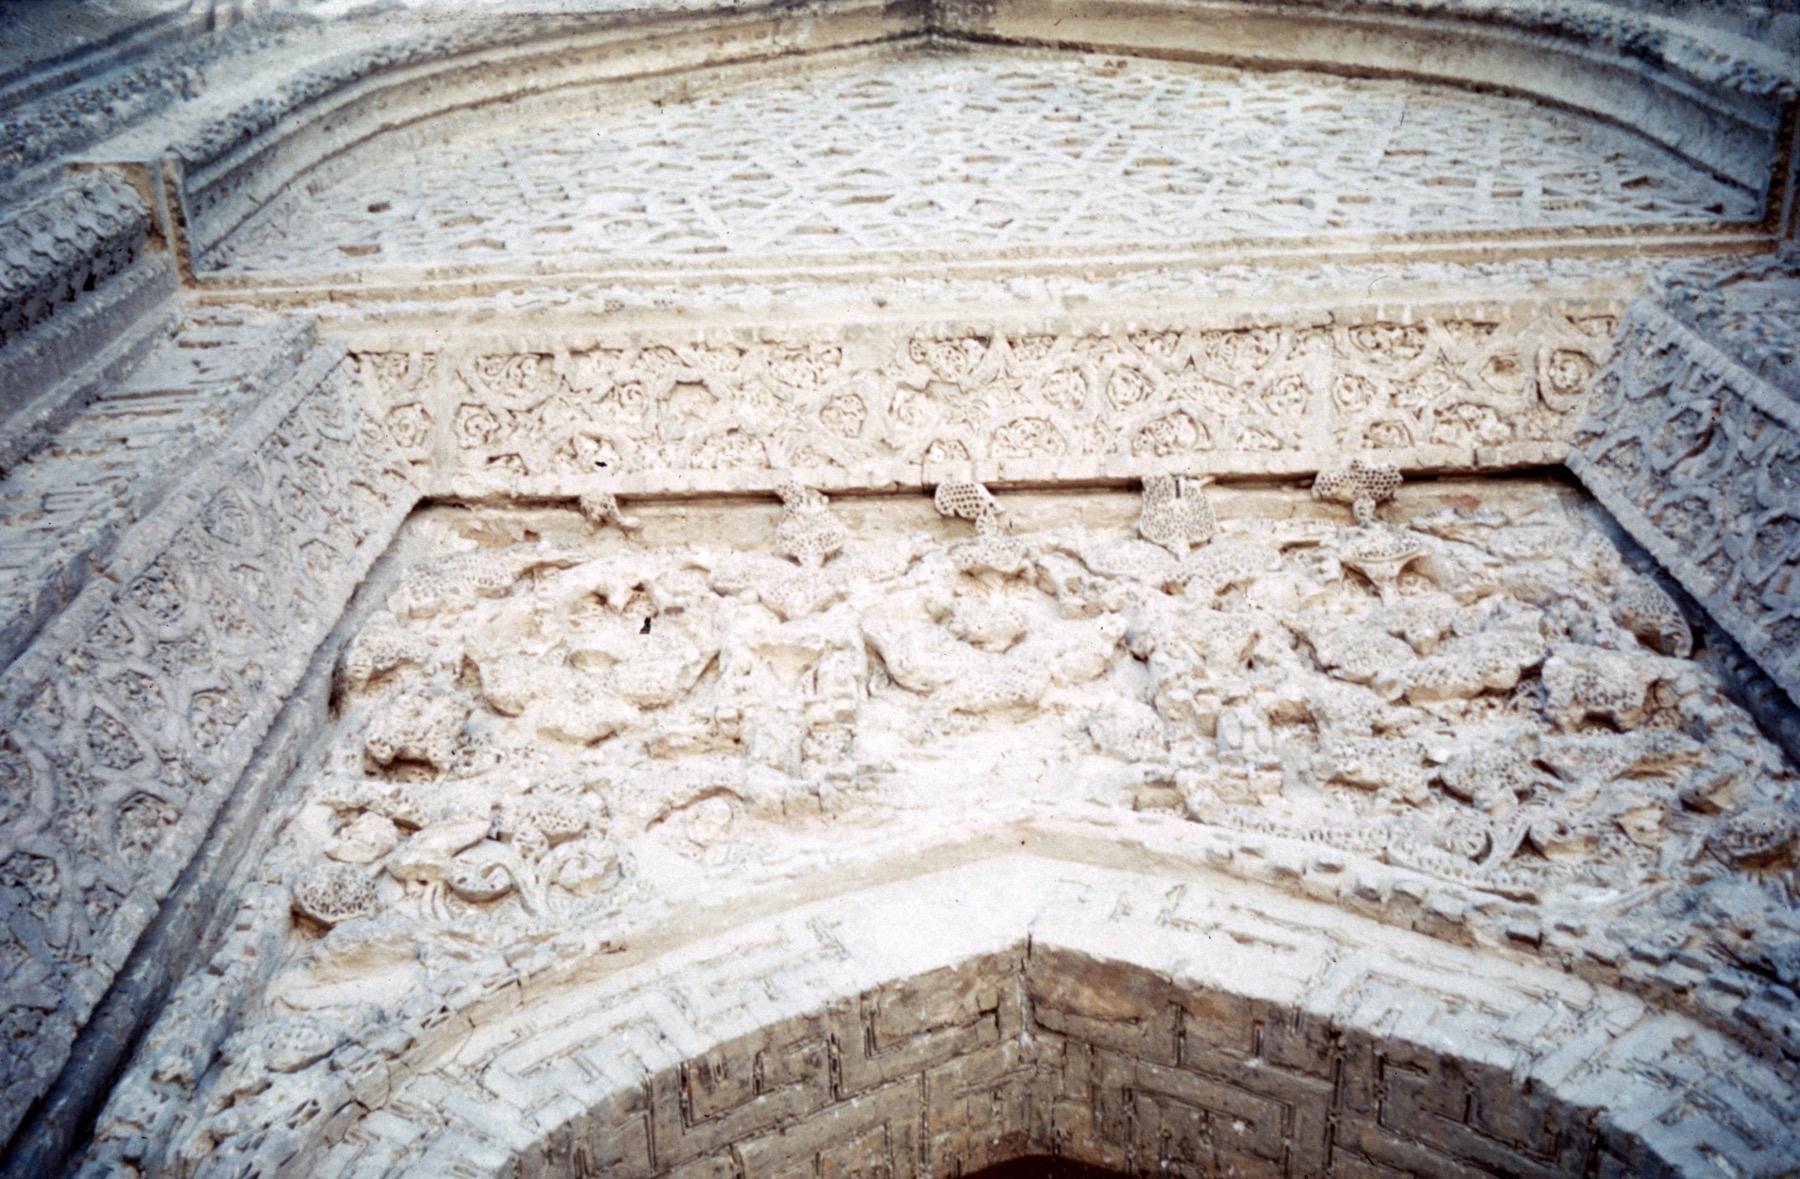 Exterior detail from entrance portal, showing carved stucco decoration